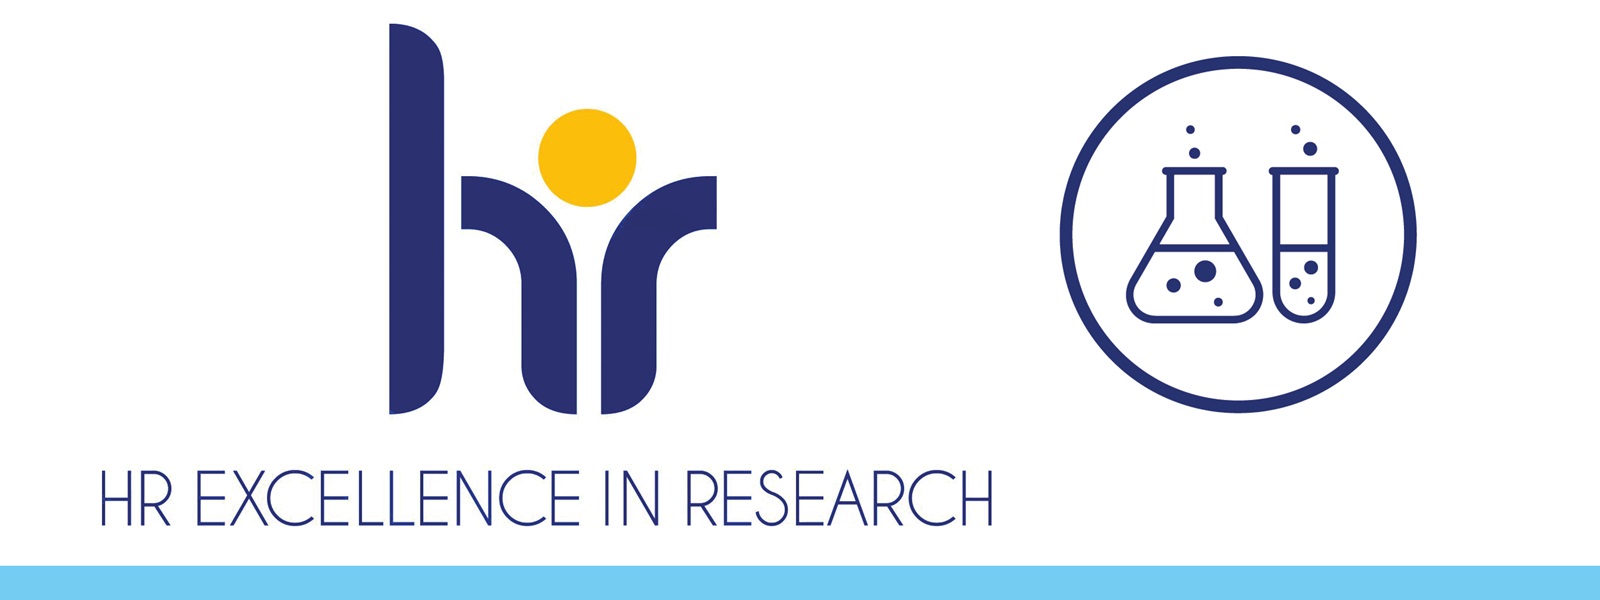 HR Excellence in research